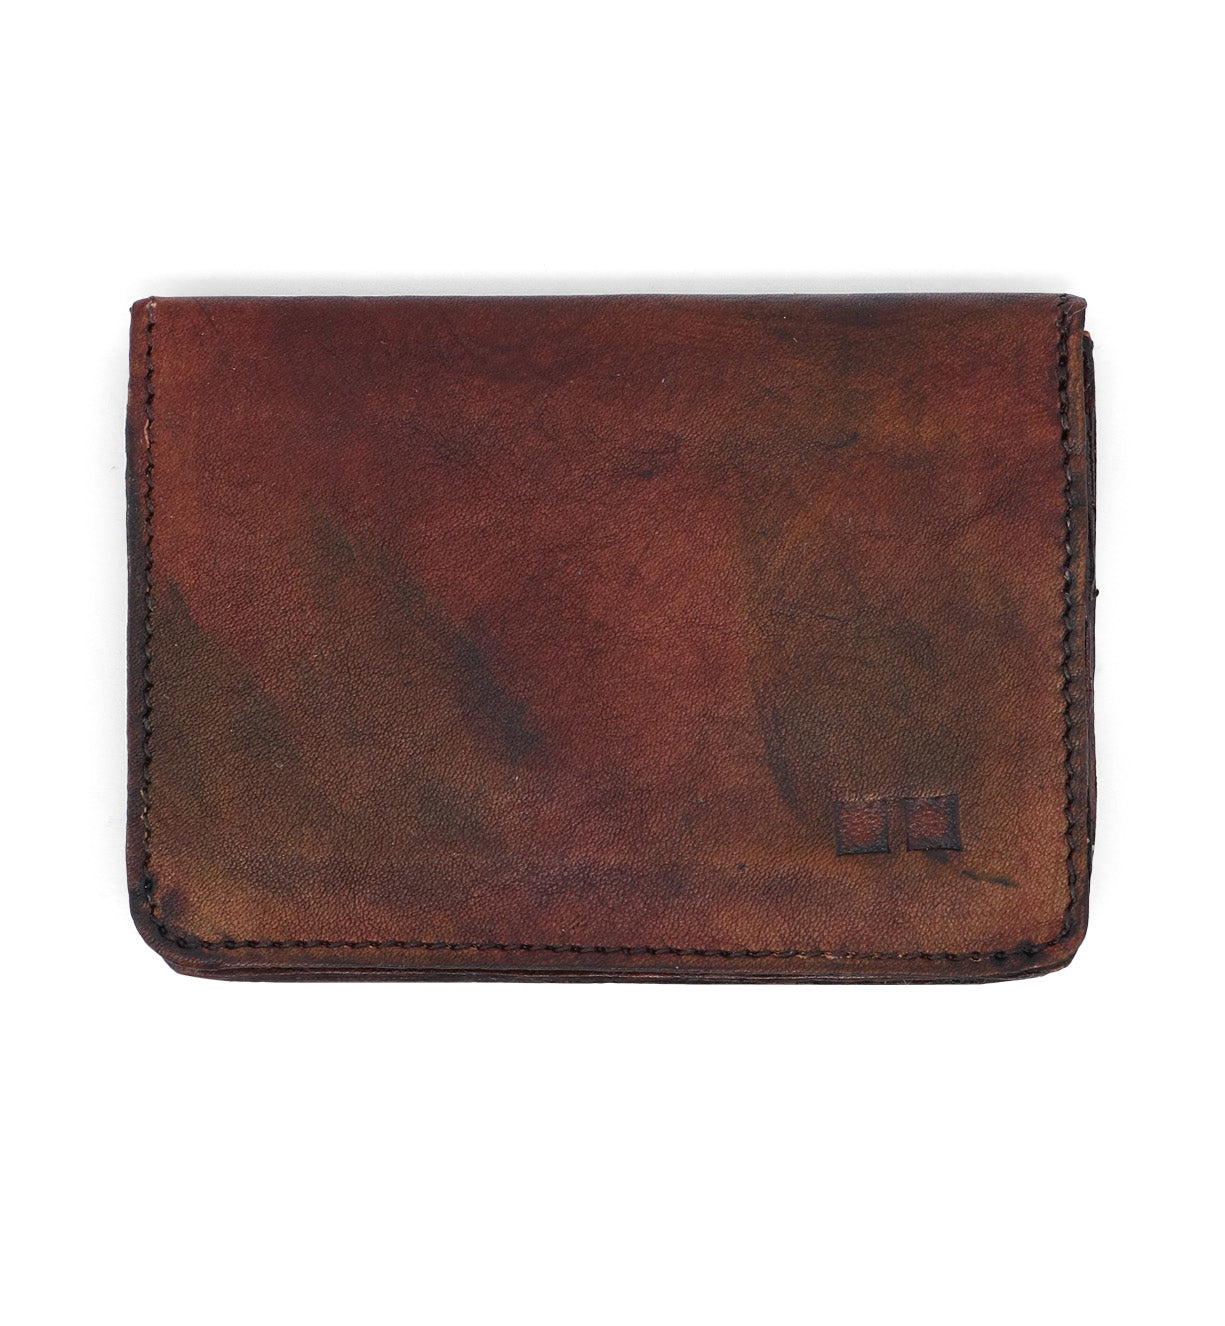 A Jeor by Bed Stu brown leather card holder on a white background.